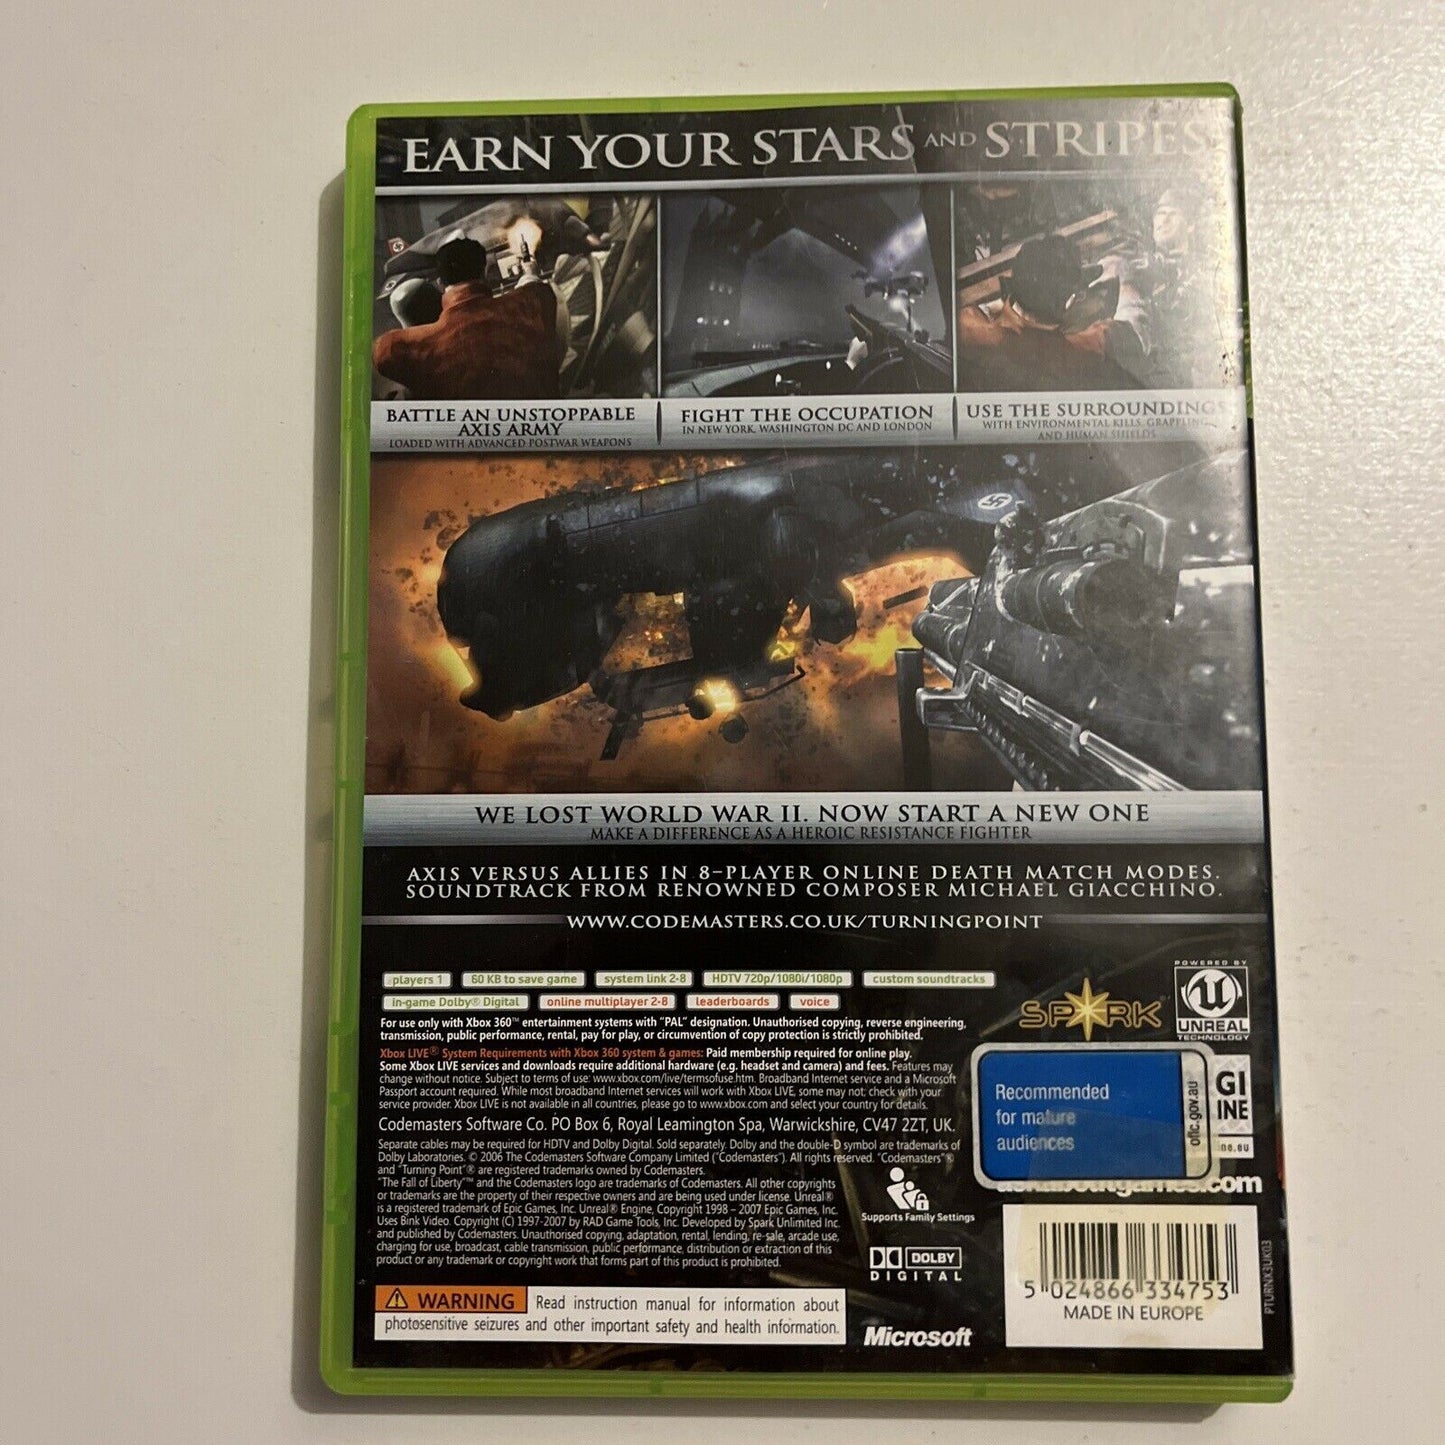 Turning Point: Fall of Liberty - Xbox 360 Including Manual PAL